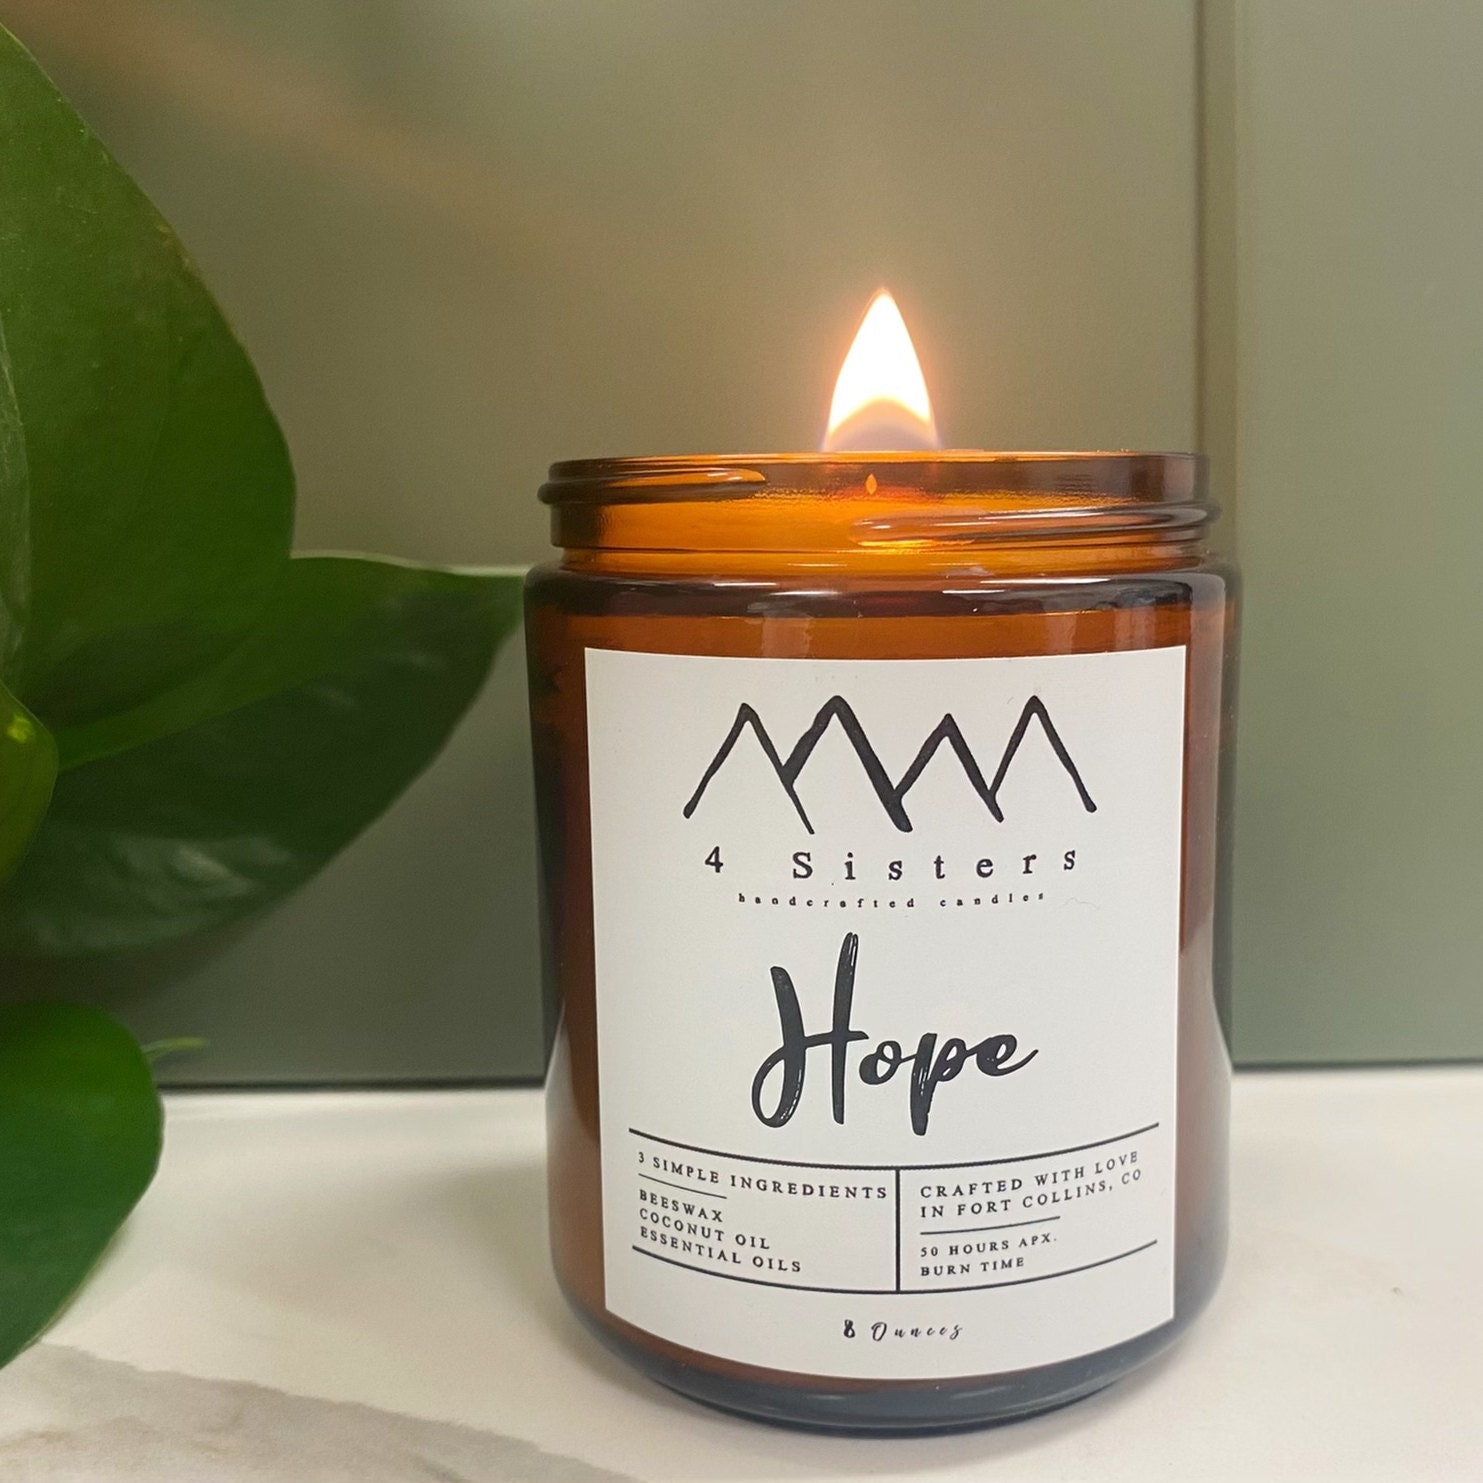 Non-toxic Candle Guide: Create A Cozy and Healthy Home - Maison Pur